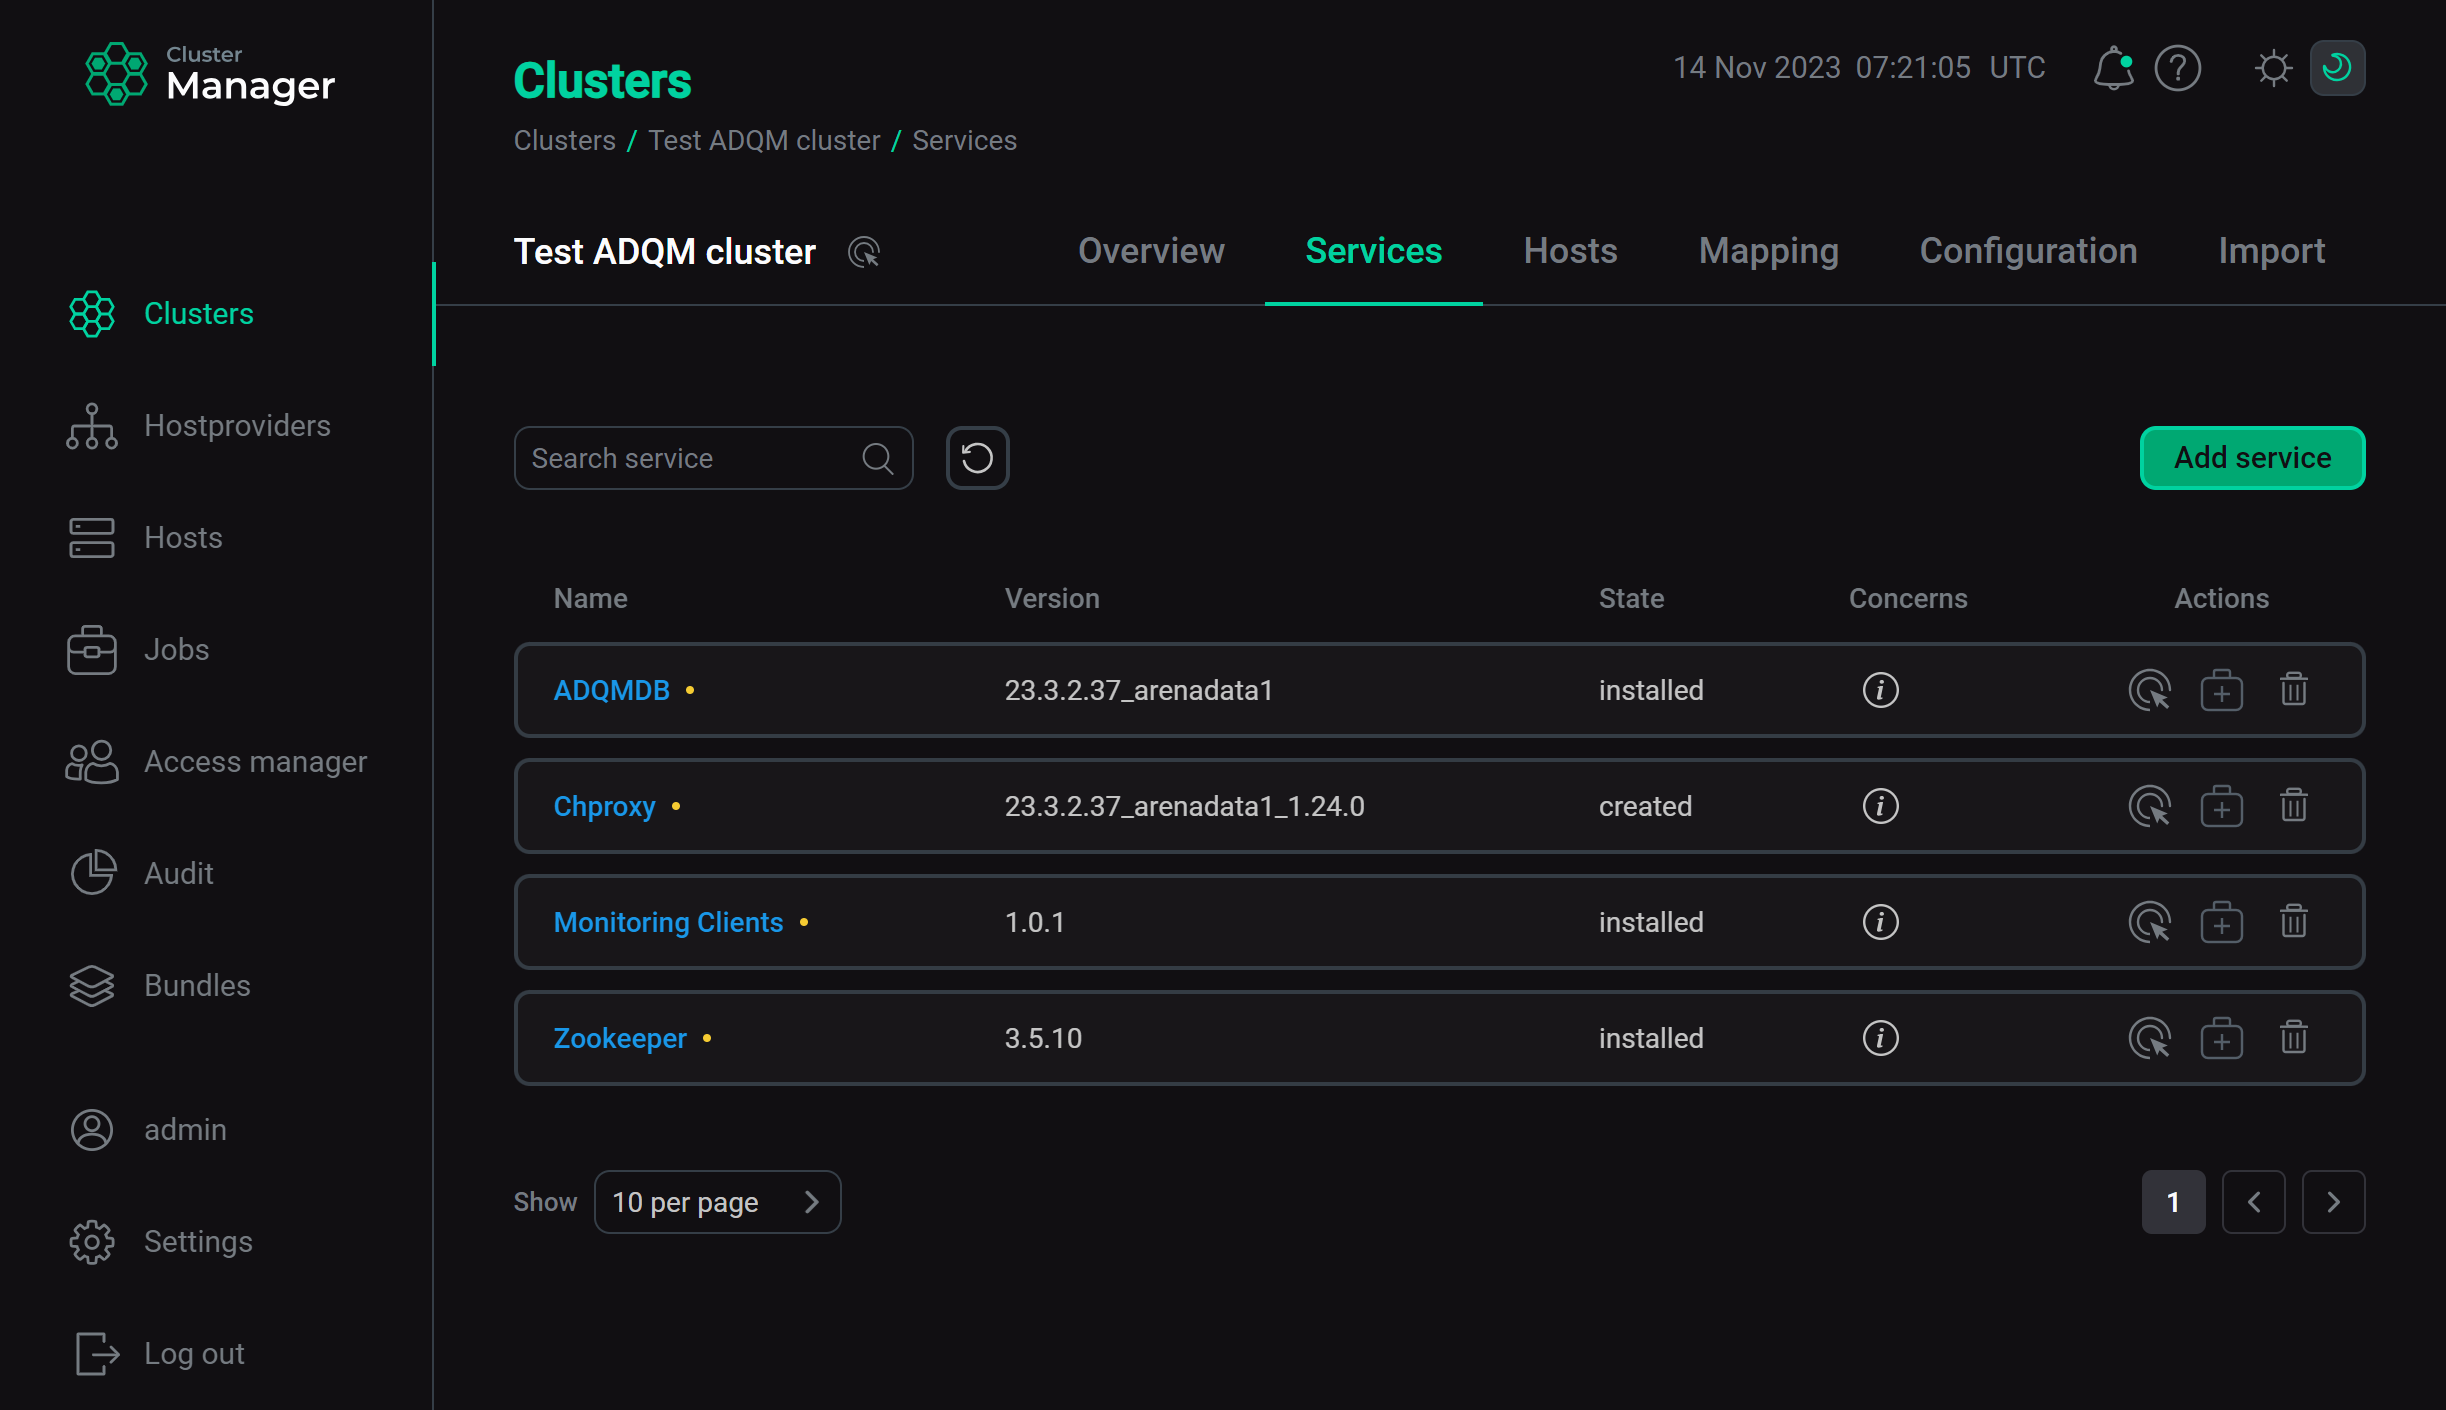 ADQM cluster services in the ADCM interface